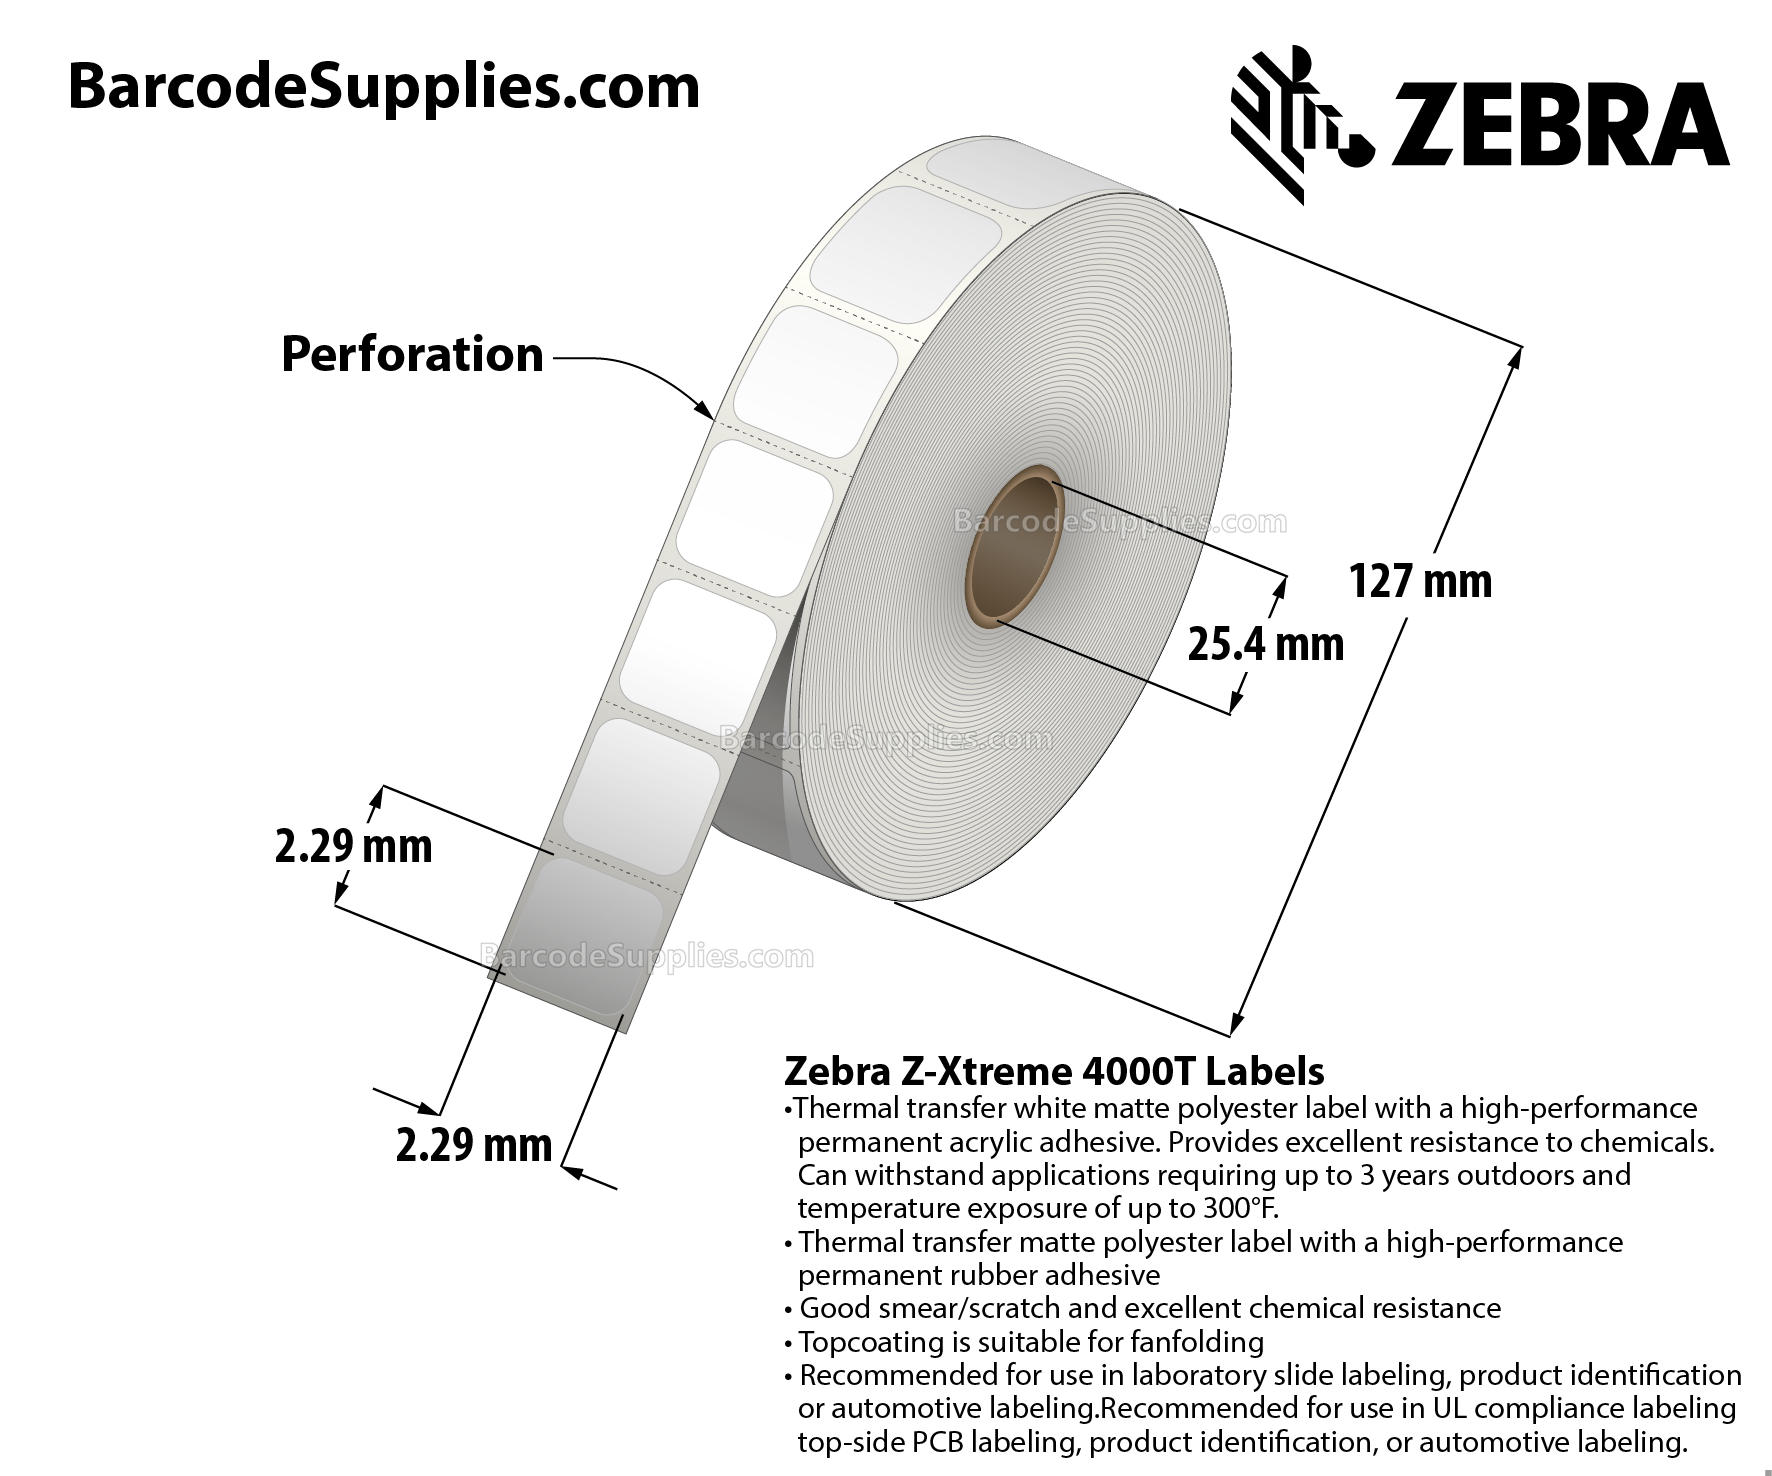 0.9 x 0.9 Thermal Transfer White Z-Xtreme 4000T White Labels With Permanent Adhesive - Perforated - 1000 Labels Per Roll - Carton Of 1 Rolls - 1000 Labels Total - MPN: 10023239